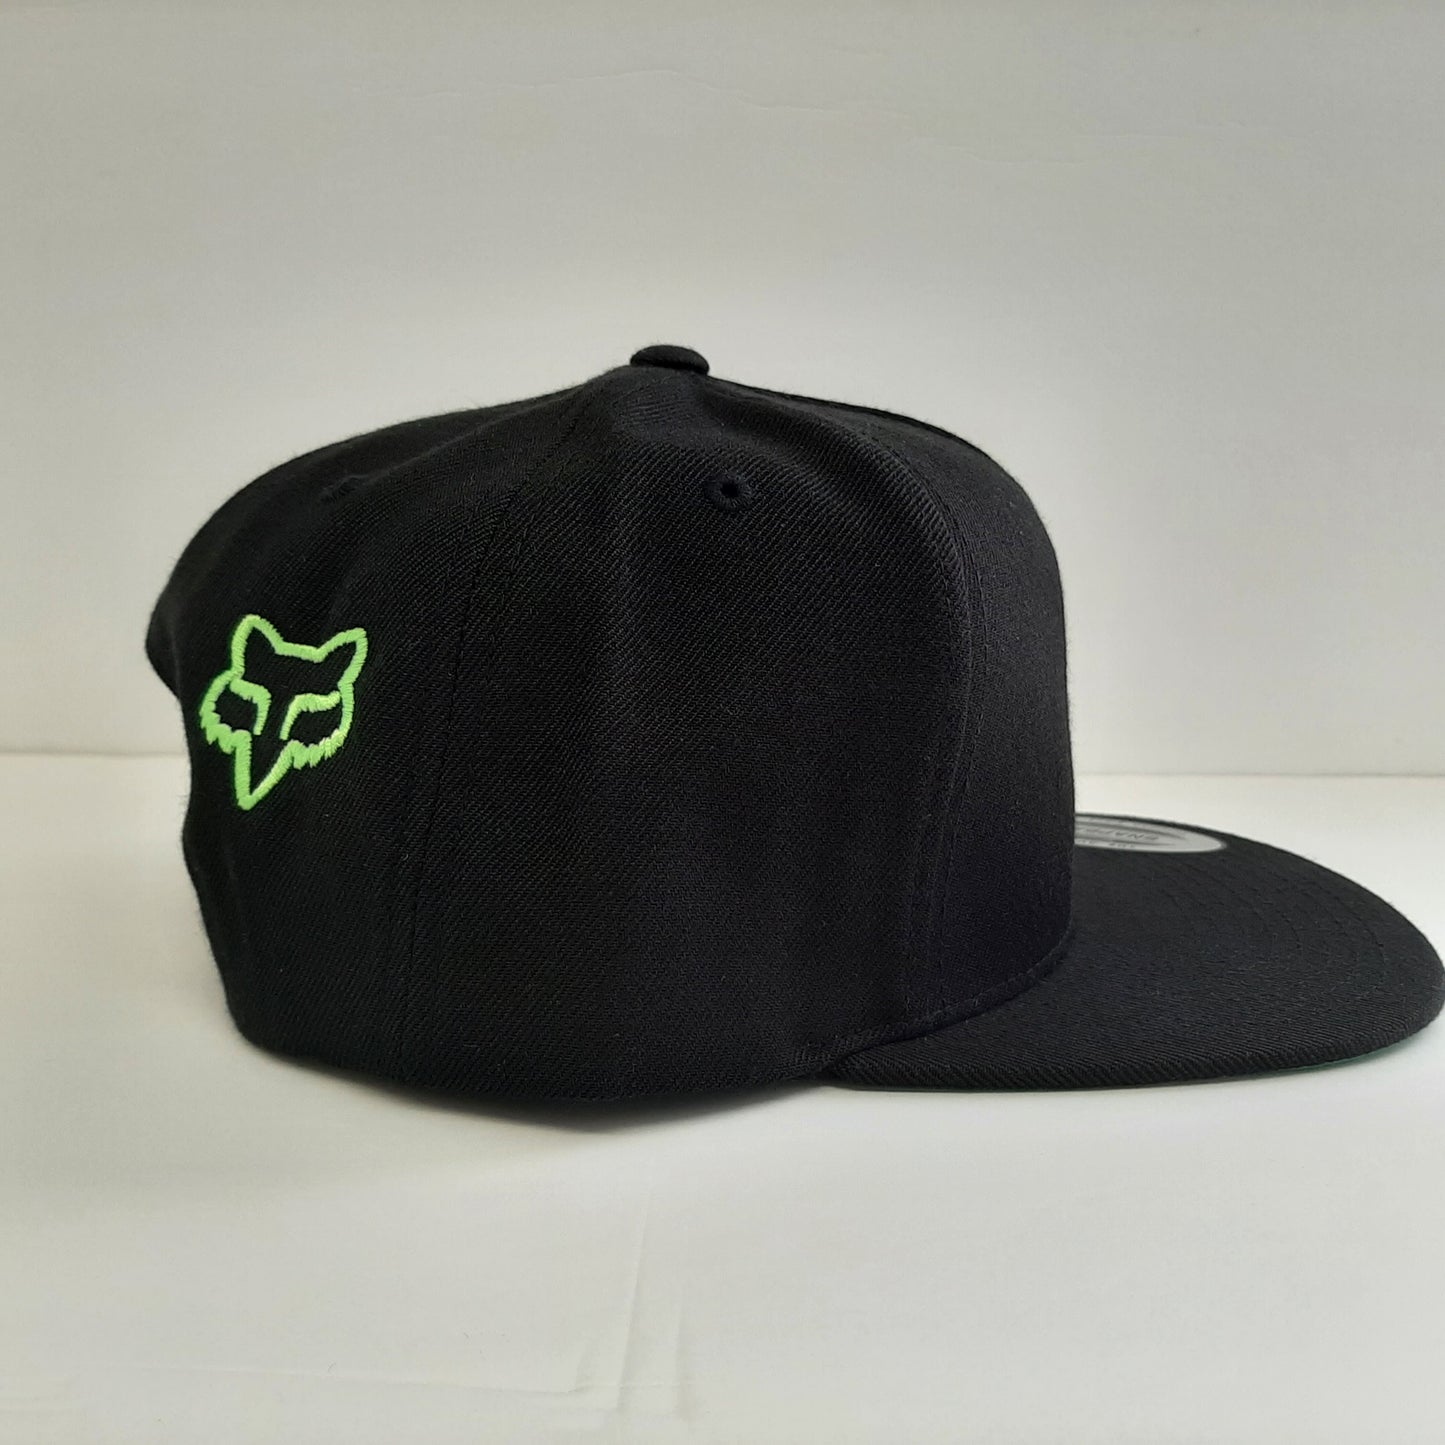 Has a Fox logo embroidered on the back right panel of the hat and the color matches the fluorescent green on the front of the cap.